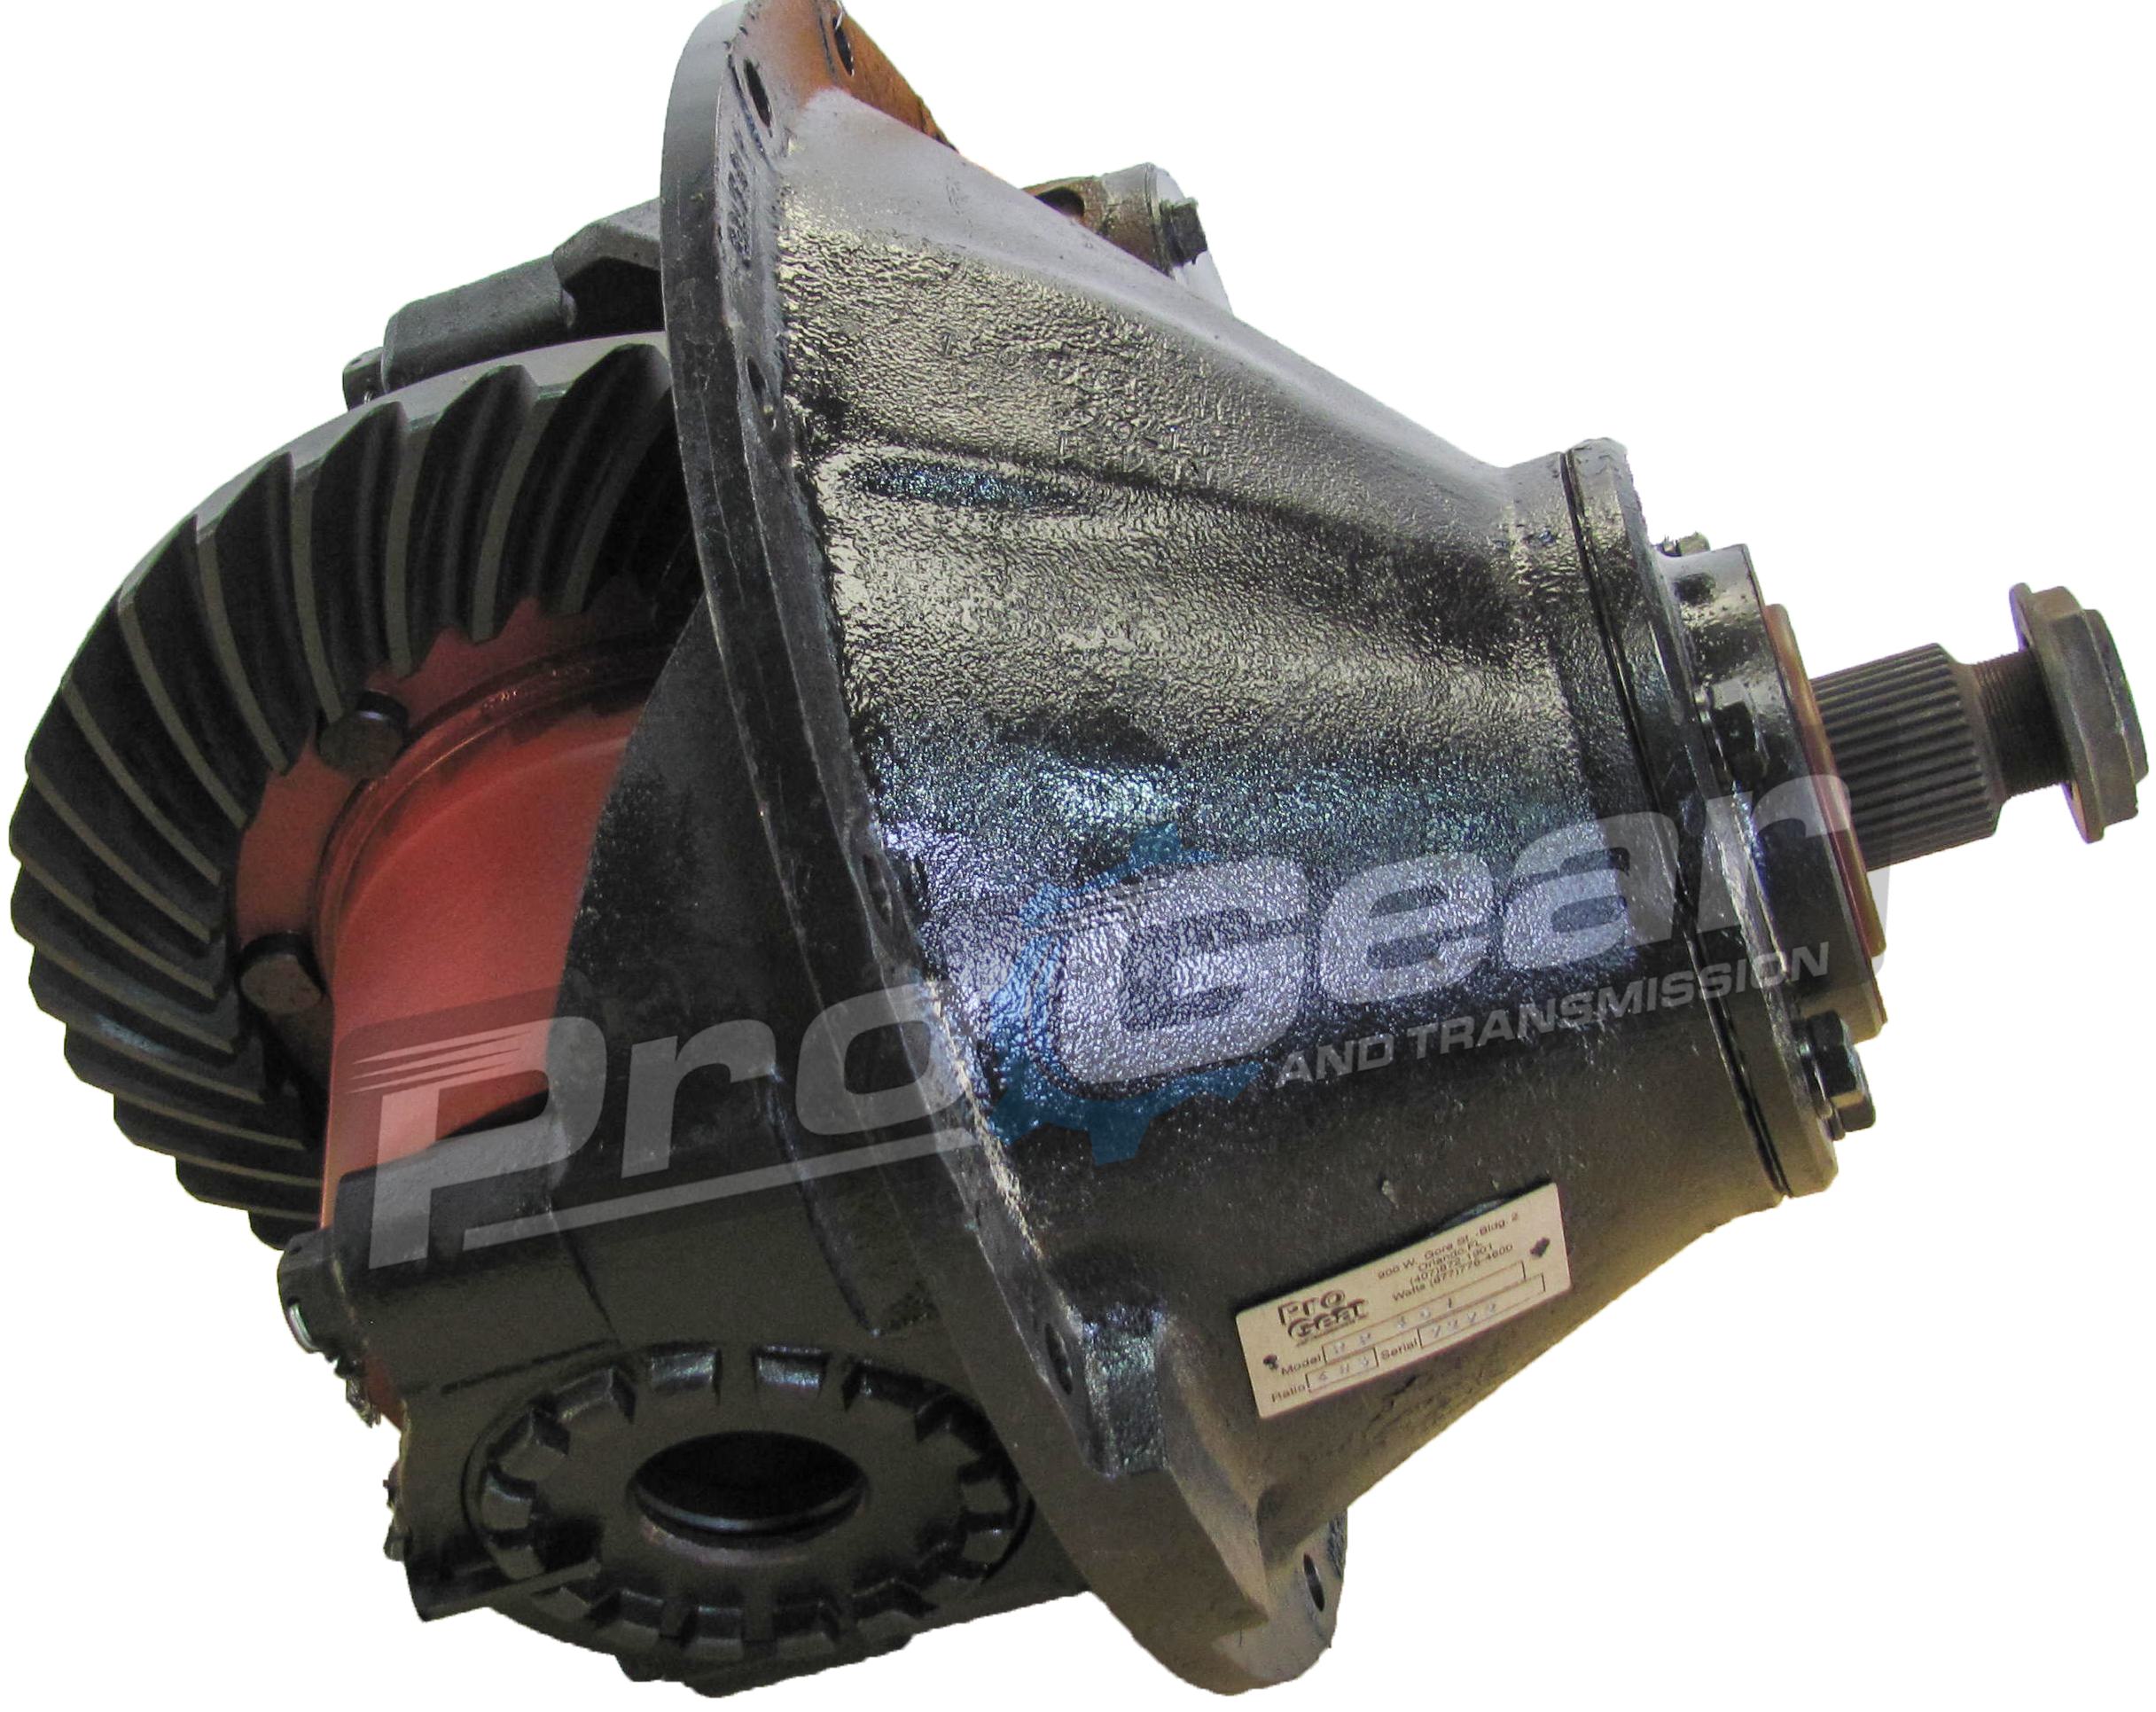 Eaton Spicer PR160 differential